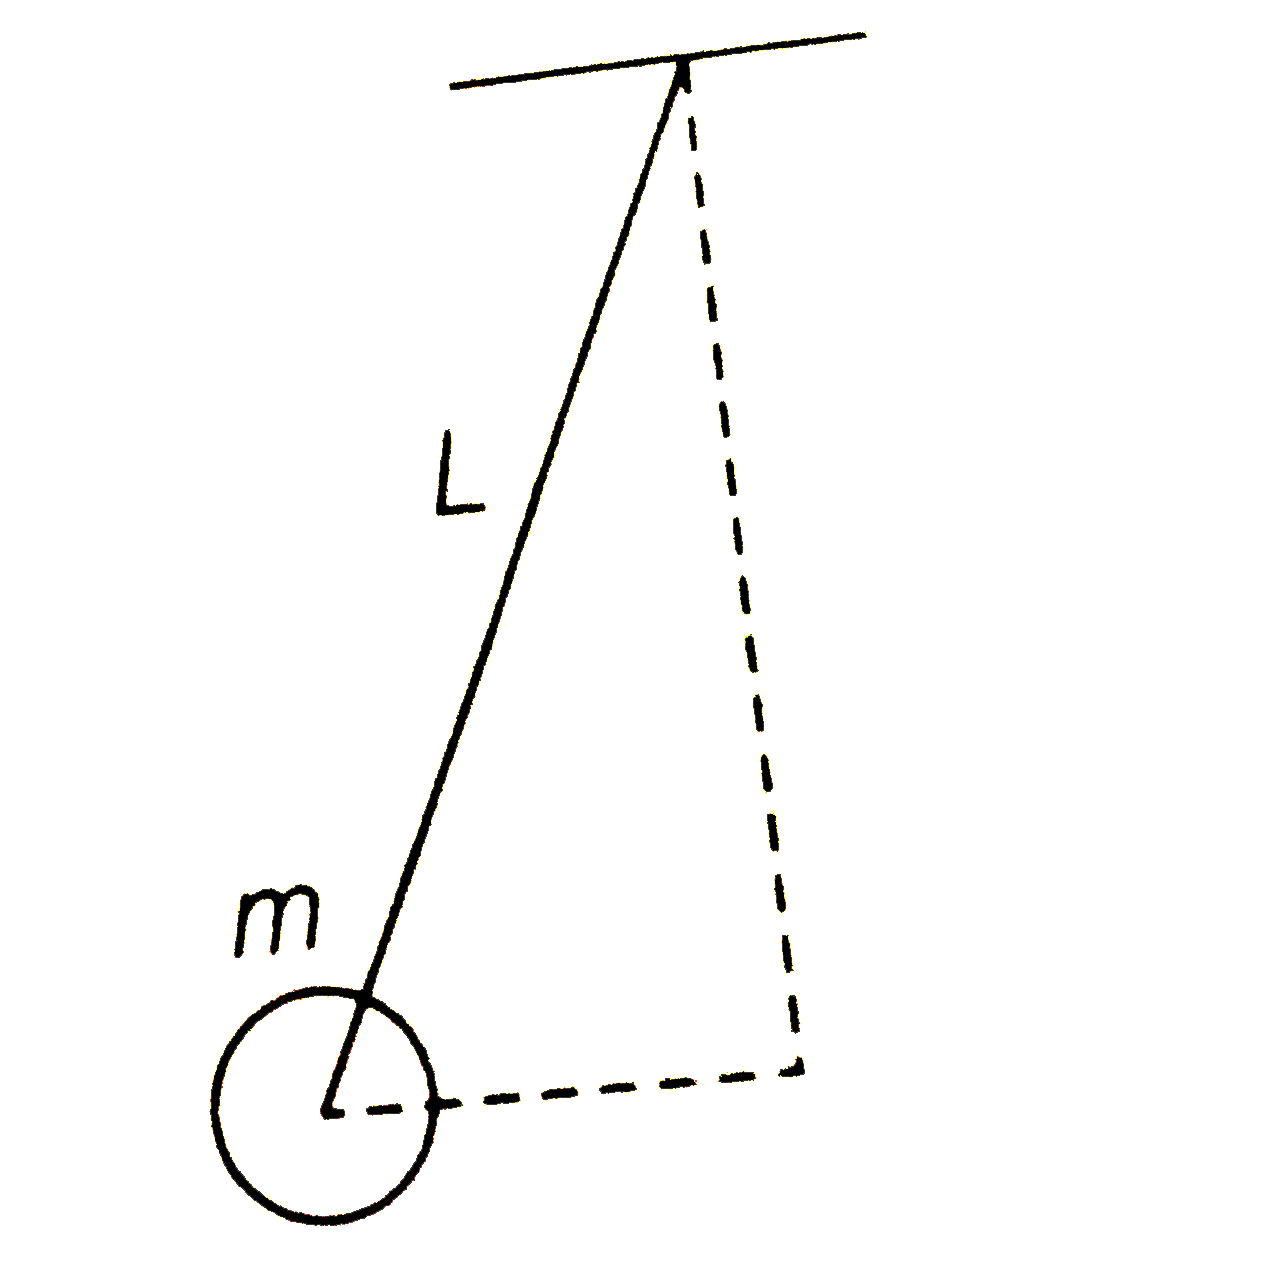 A ball of mass (m) 0.5 kg  is attached to the end of a string having length (L) 0.5 m. The ball is rotated on a horizontal circular path about vertical axis .  The maximum tension that the string can bear is 324 N . The maximum possible value of angular  velocity of ball (in rad  s^(-1))is